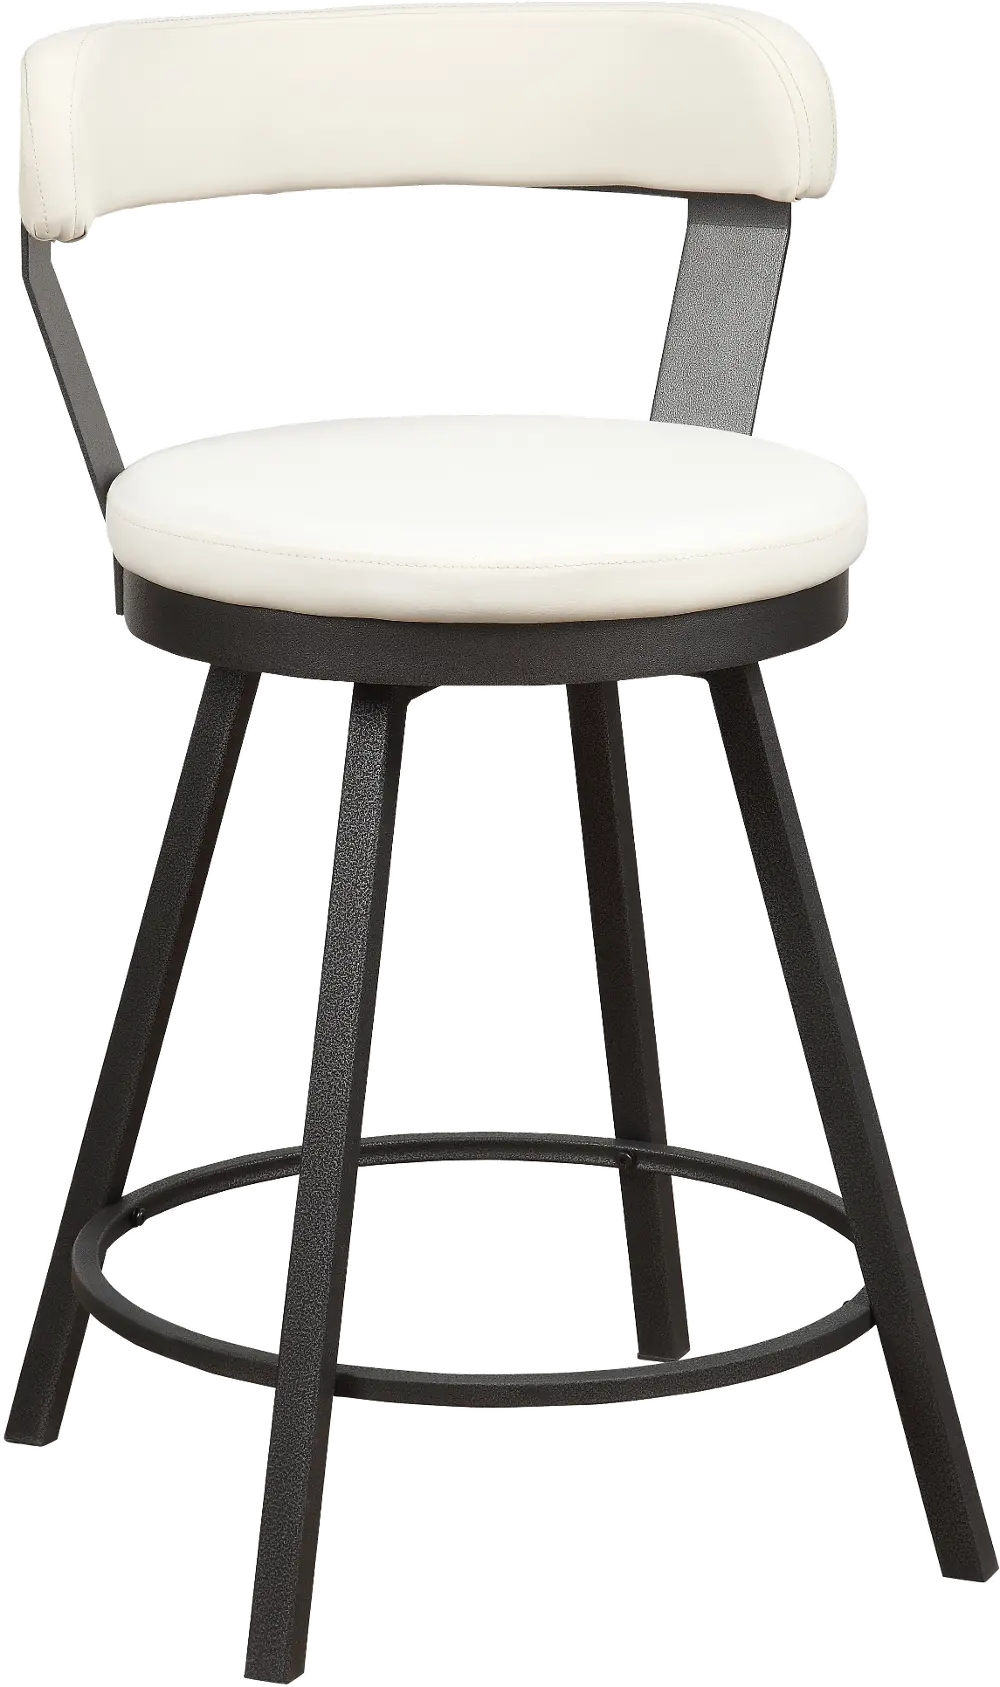 Appert Bright White 24 Inch Counter Height Stool-1